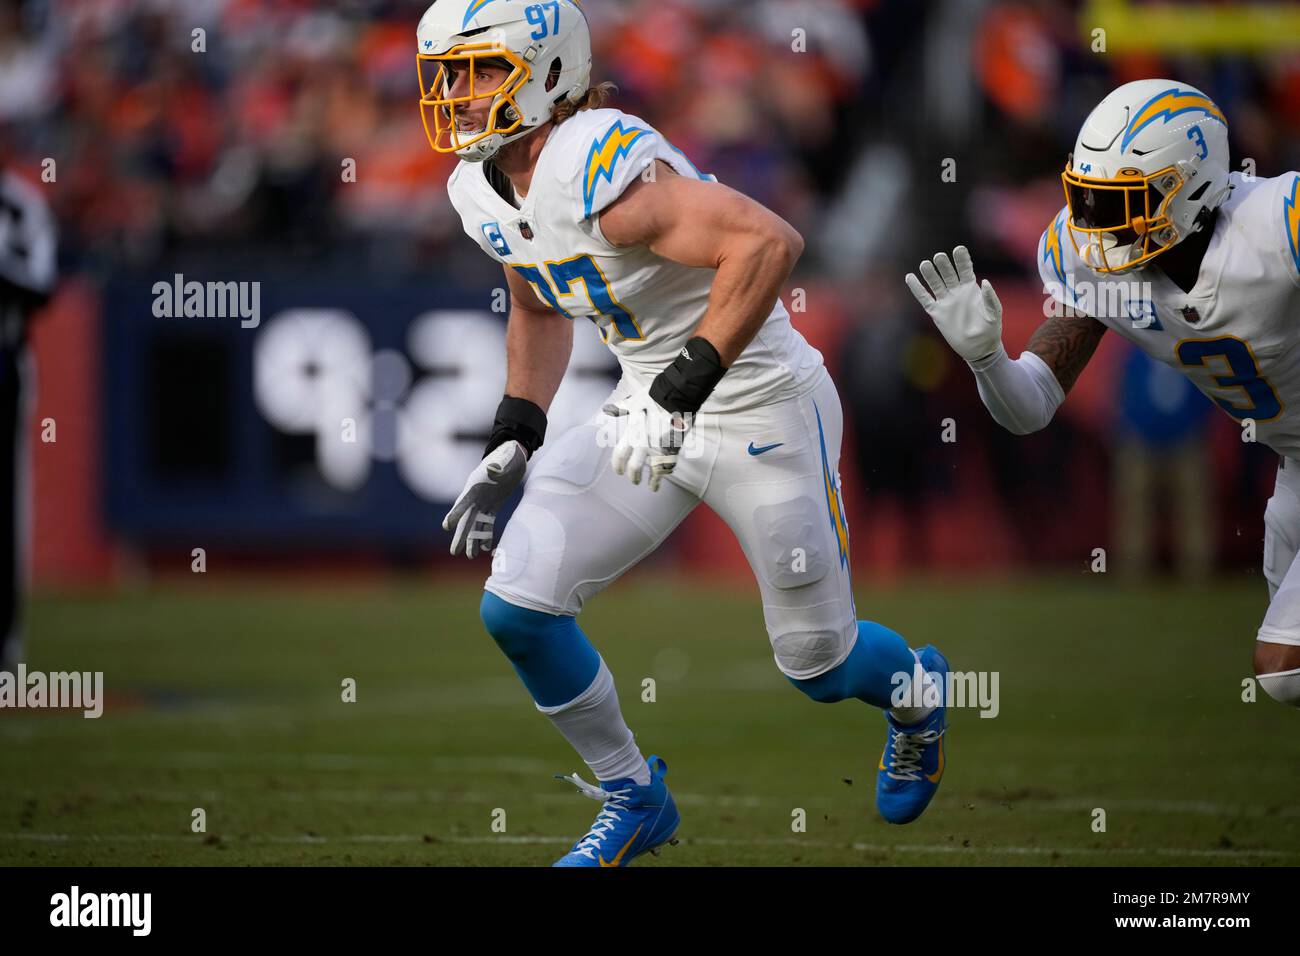 chargers 97 bosa